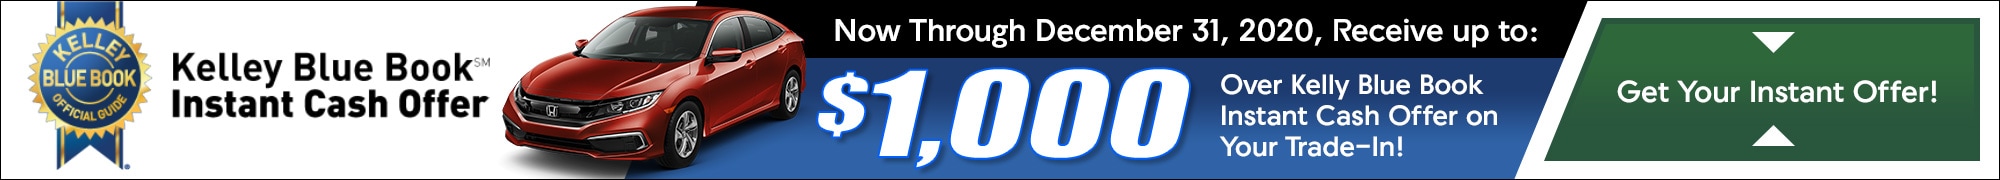 Up to $1,000 Over KBB Instant Cash Offer on Your Trade!